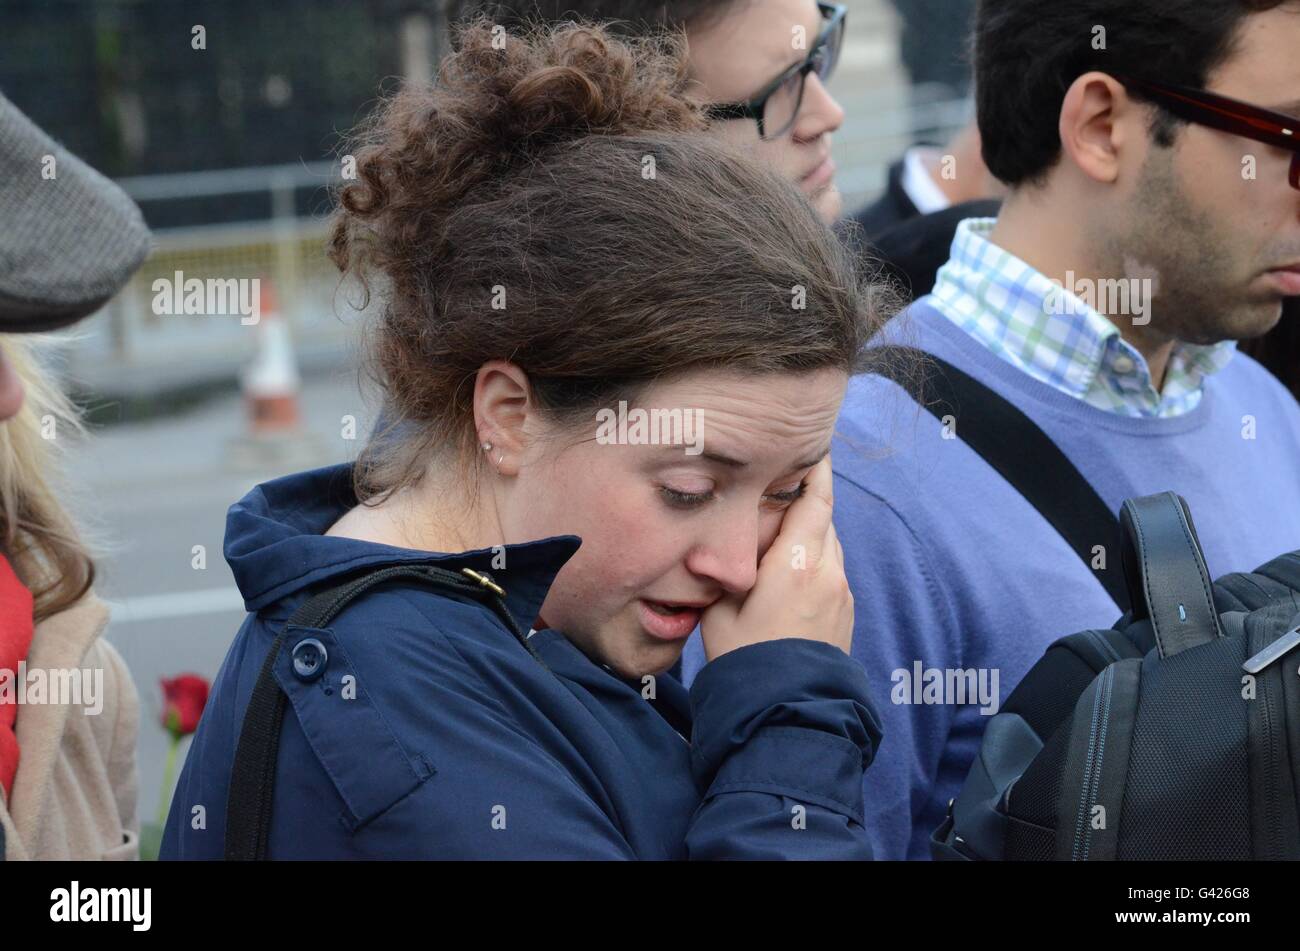 London, England. 17 June 2016. A mourner wipes away a tear as she is overcome with grief following the death of Jo Cox MP. Credit: Marc Ward/Alamy Live News Stock Photo